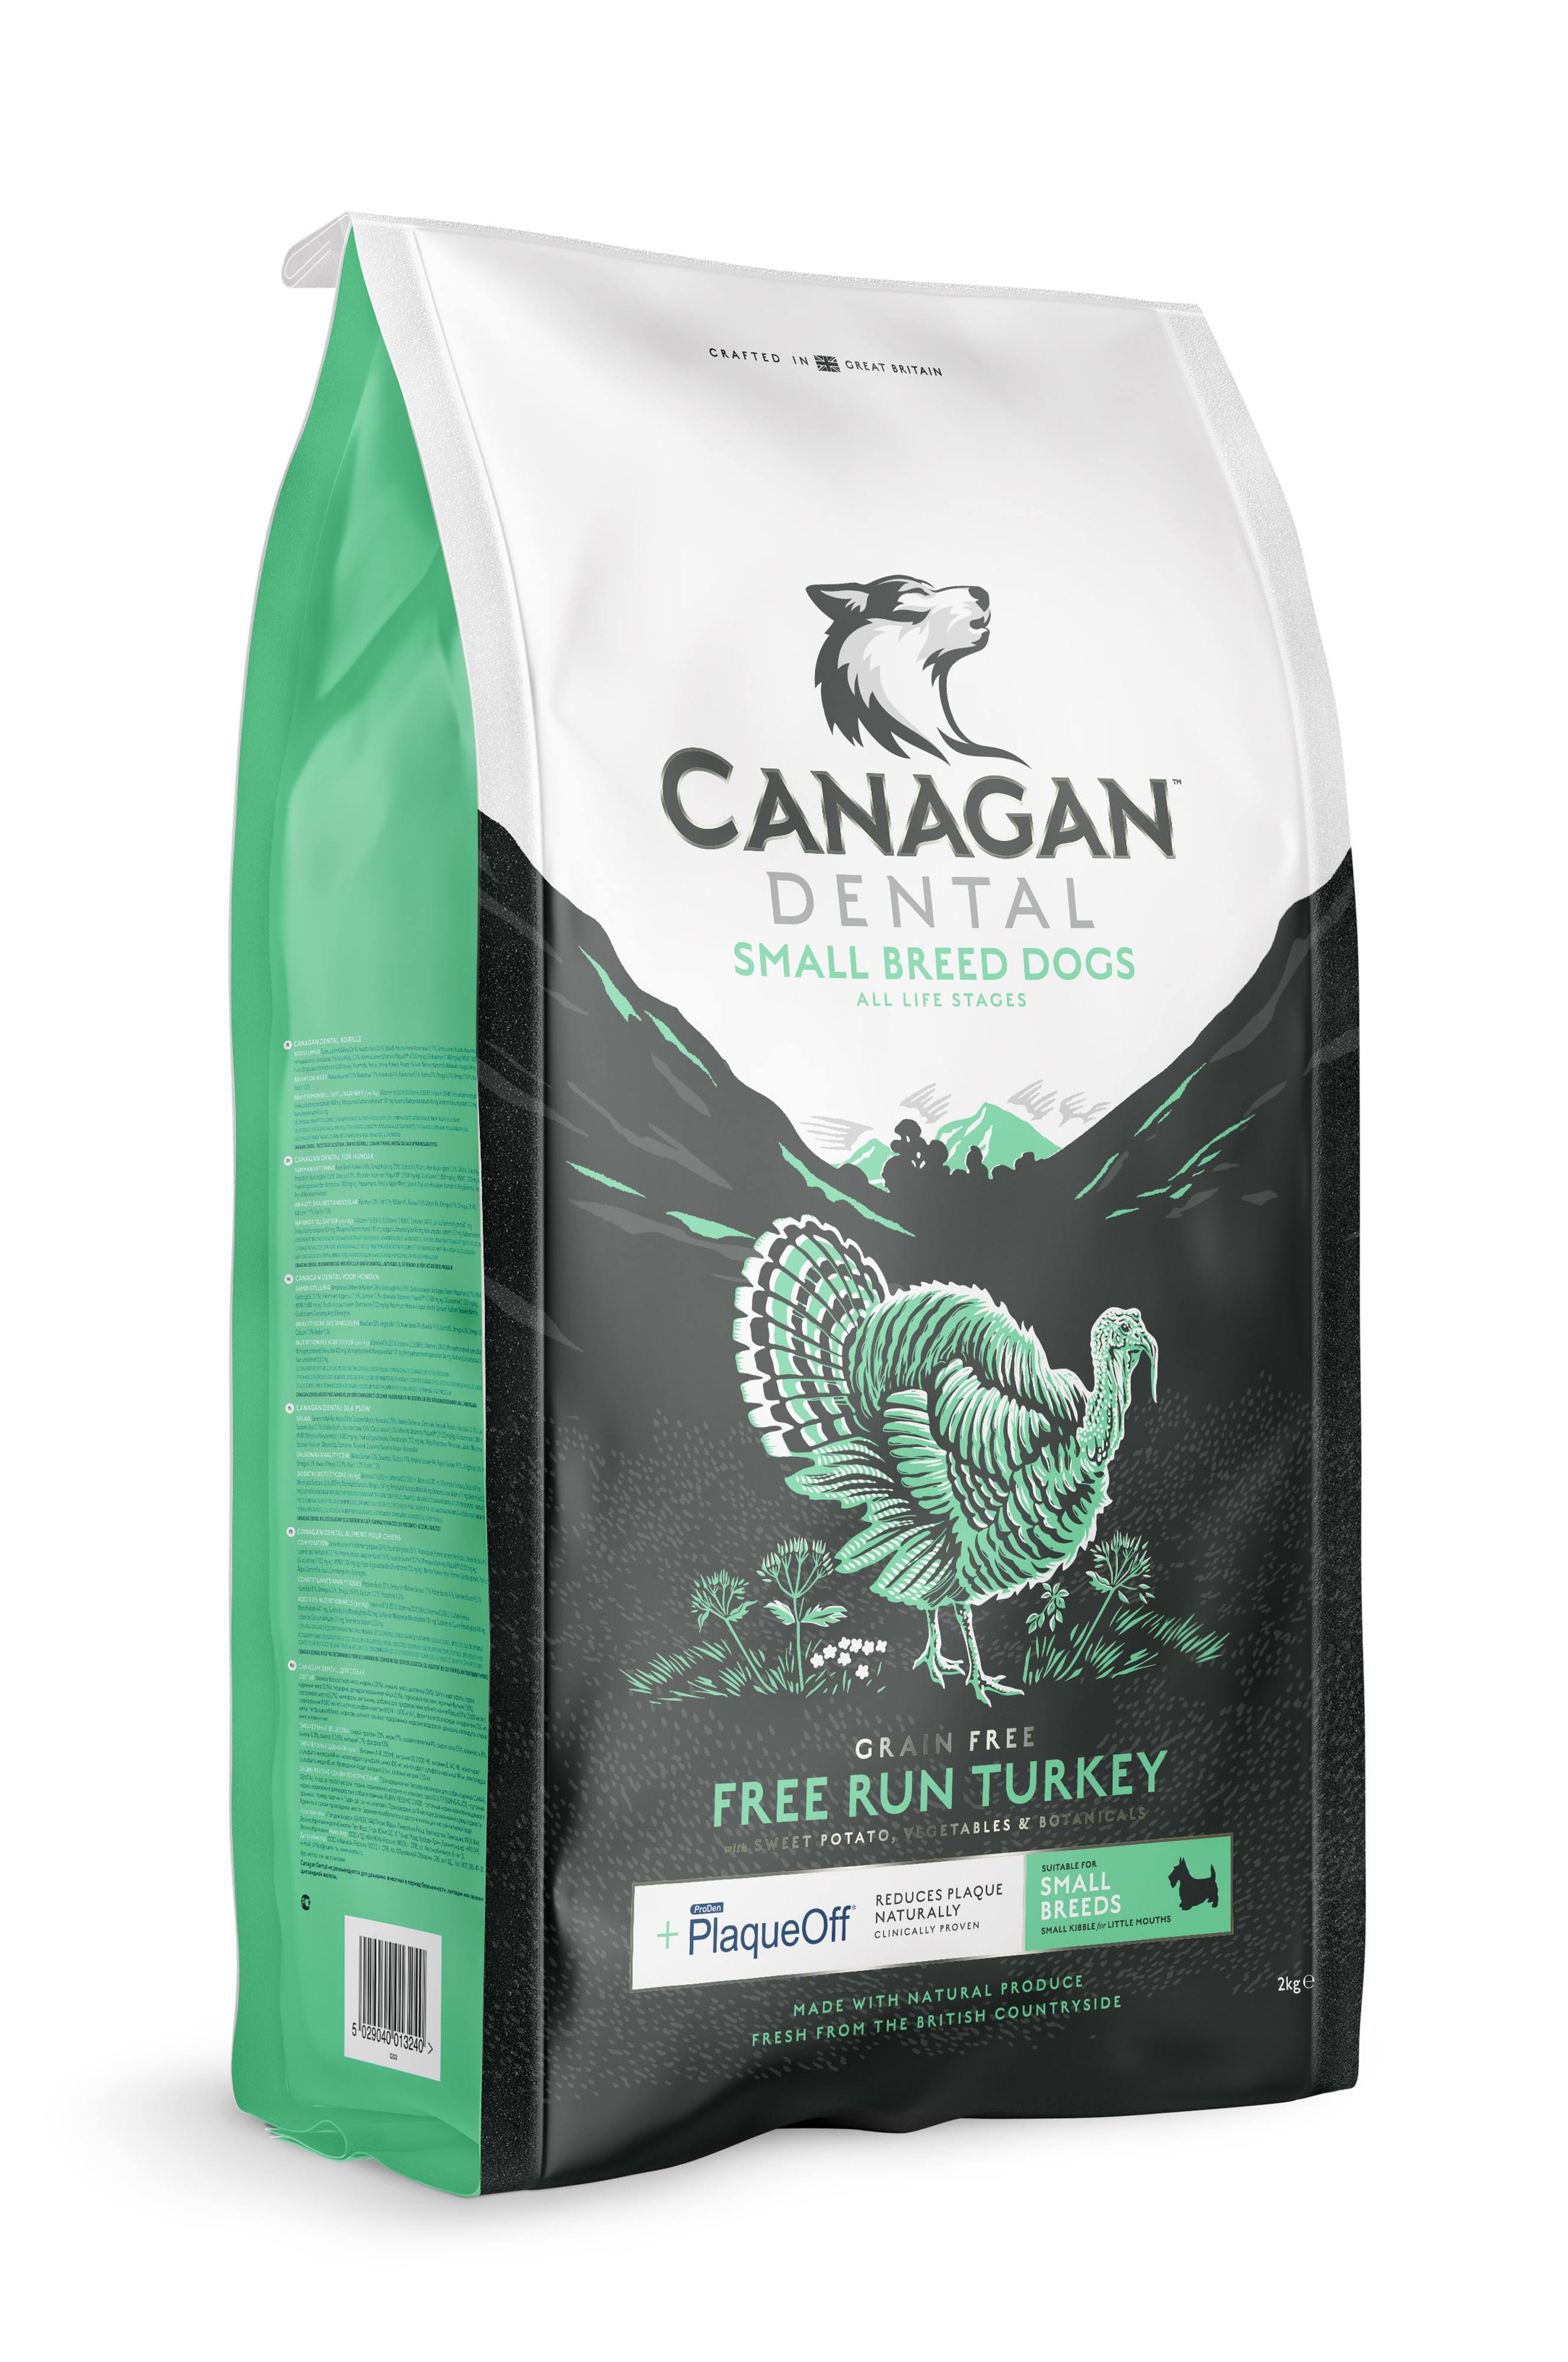 Canagan Small Breed Dental For Dogs With Turkey Free Run - 6kg